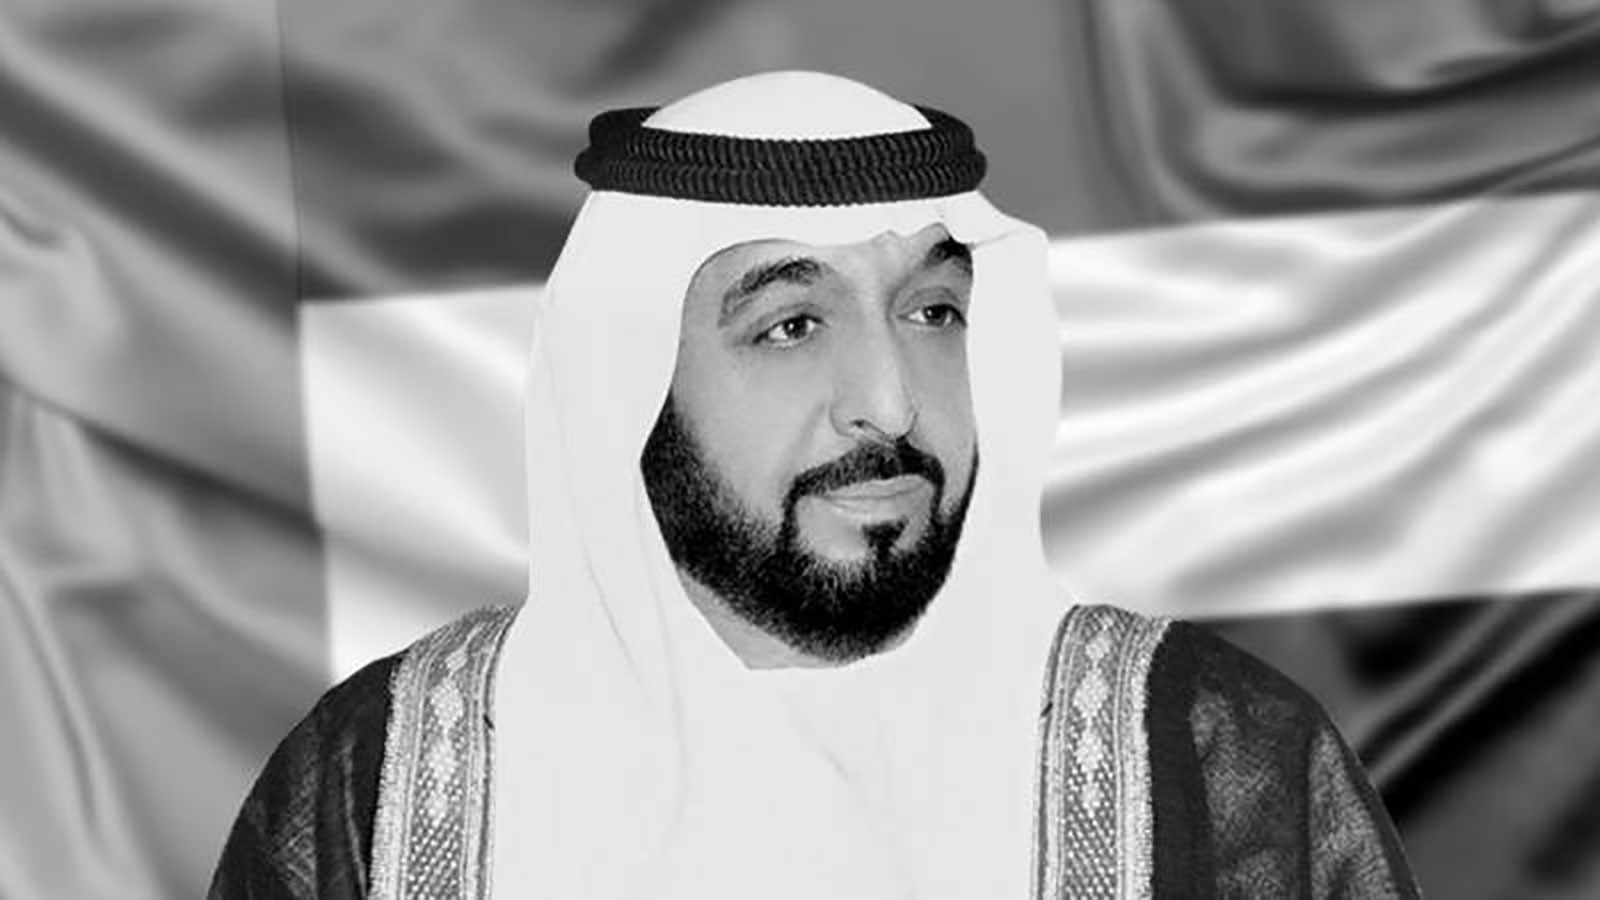 The UN General Assembly will hold a memorial session tomorrow for the late Sheikh Khalifa bin Zayed